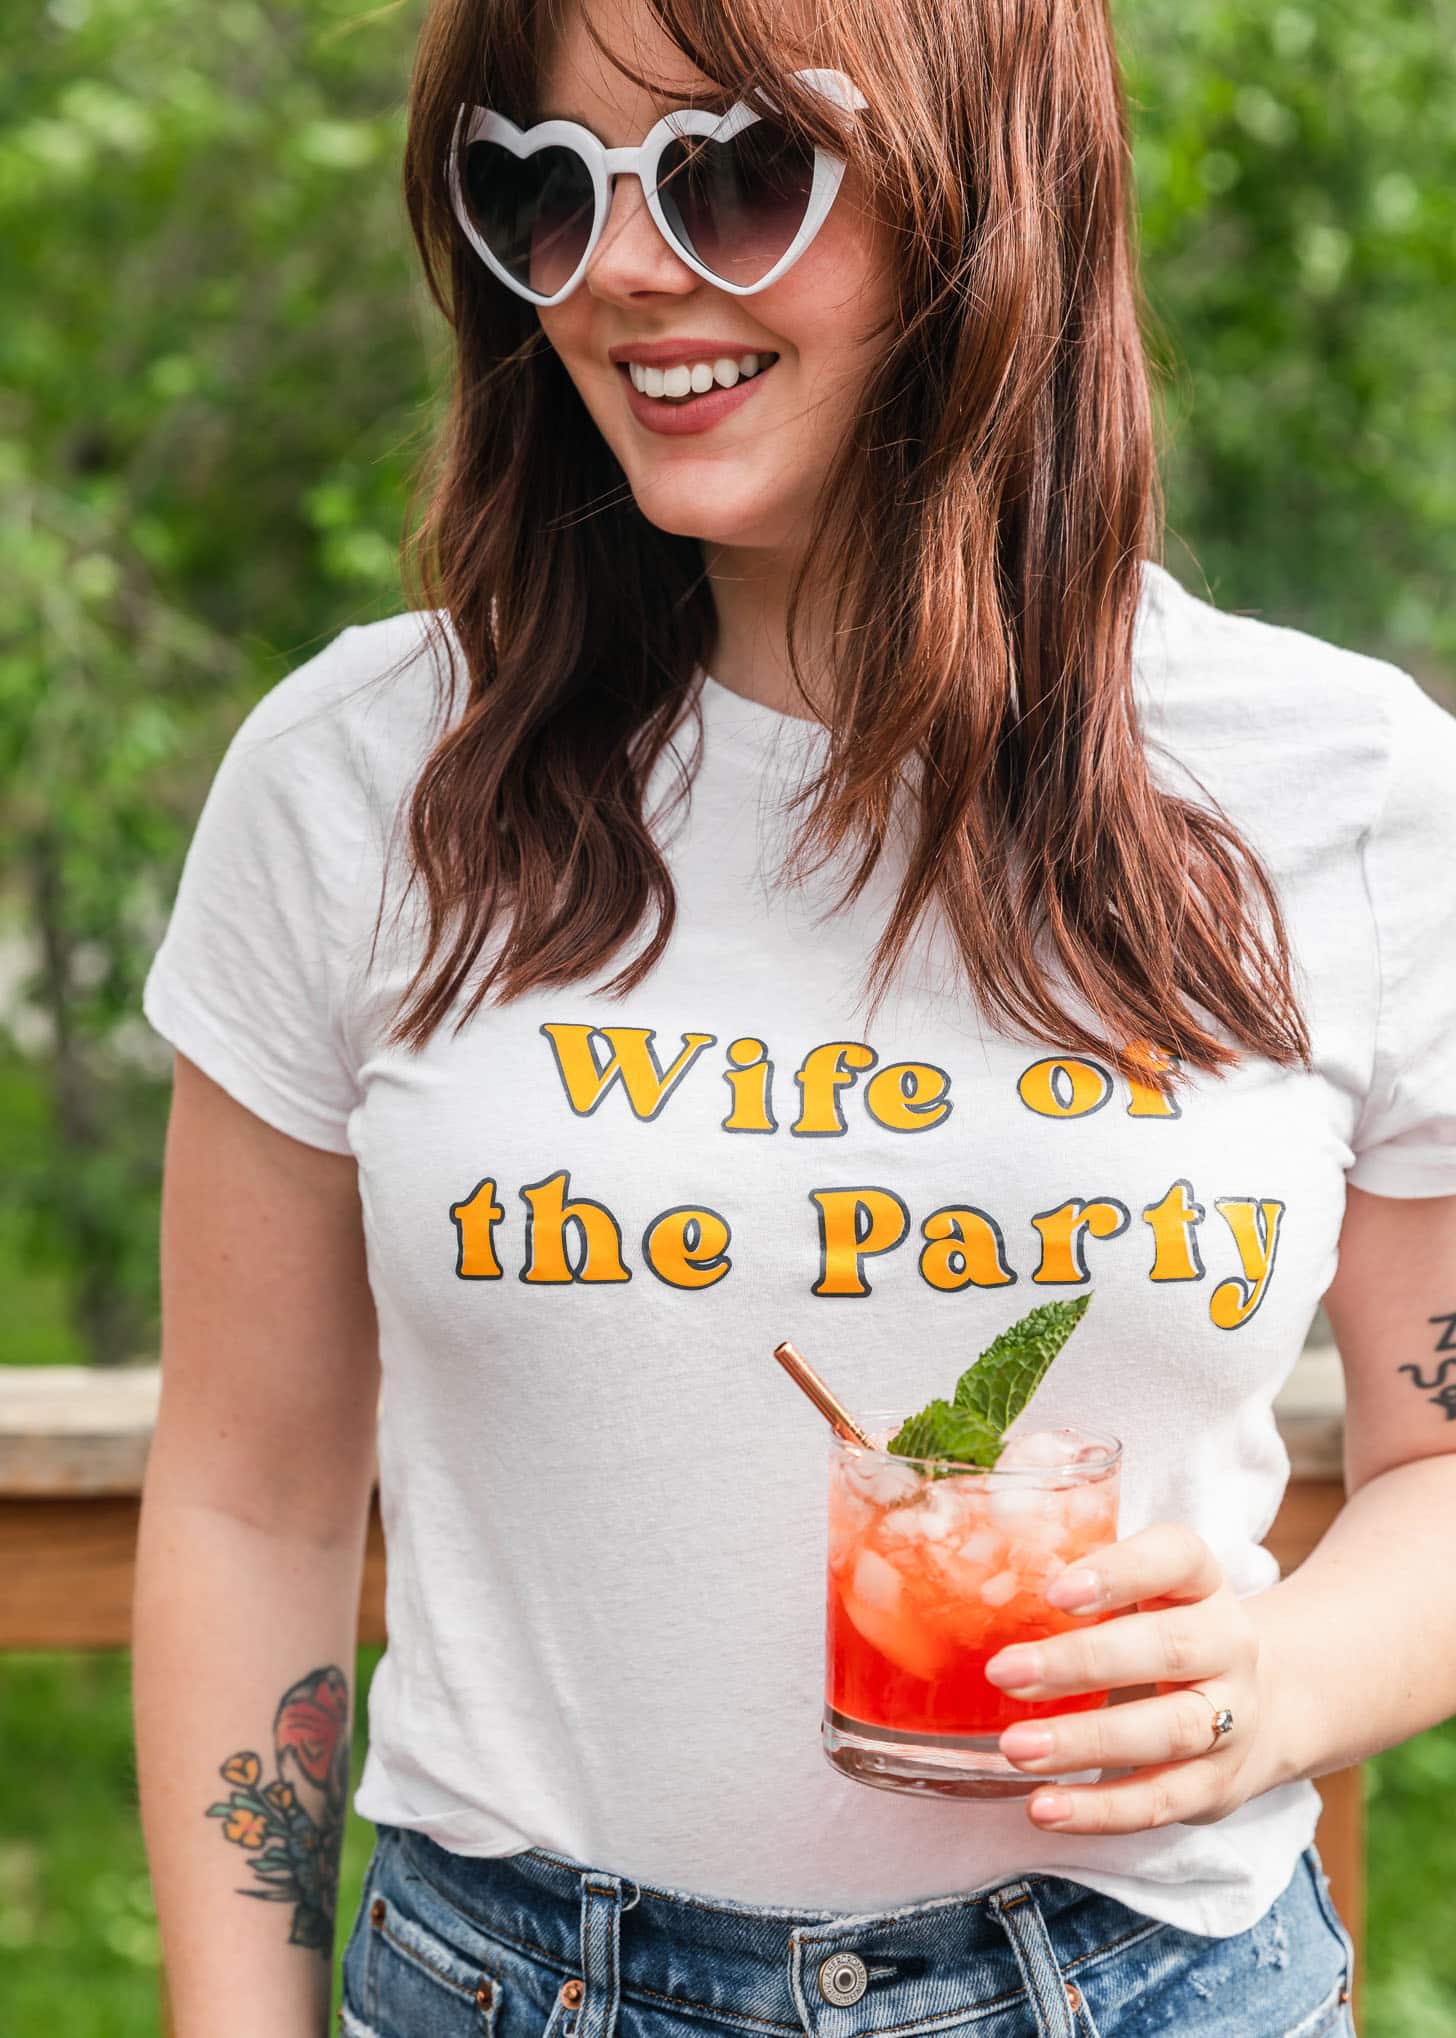 A woman with wavy dark red hair and bangs, white heart sunglasses, and a white "Wife of the Party" t-shirt holding a pink cocktail in front of trees.